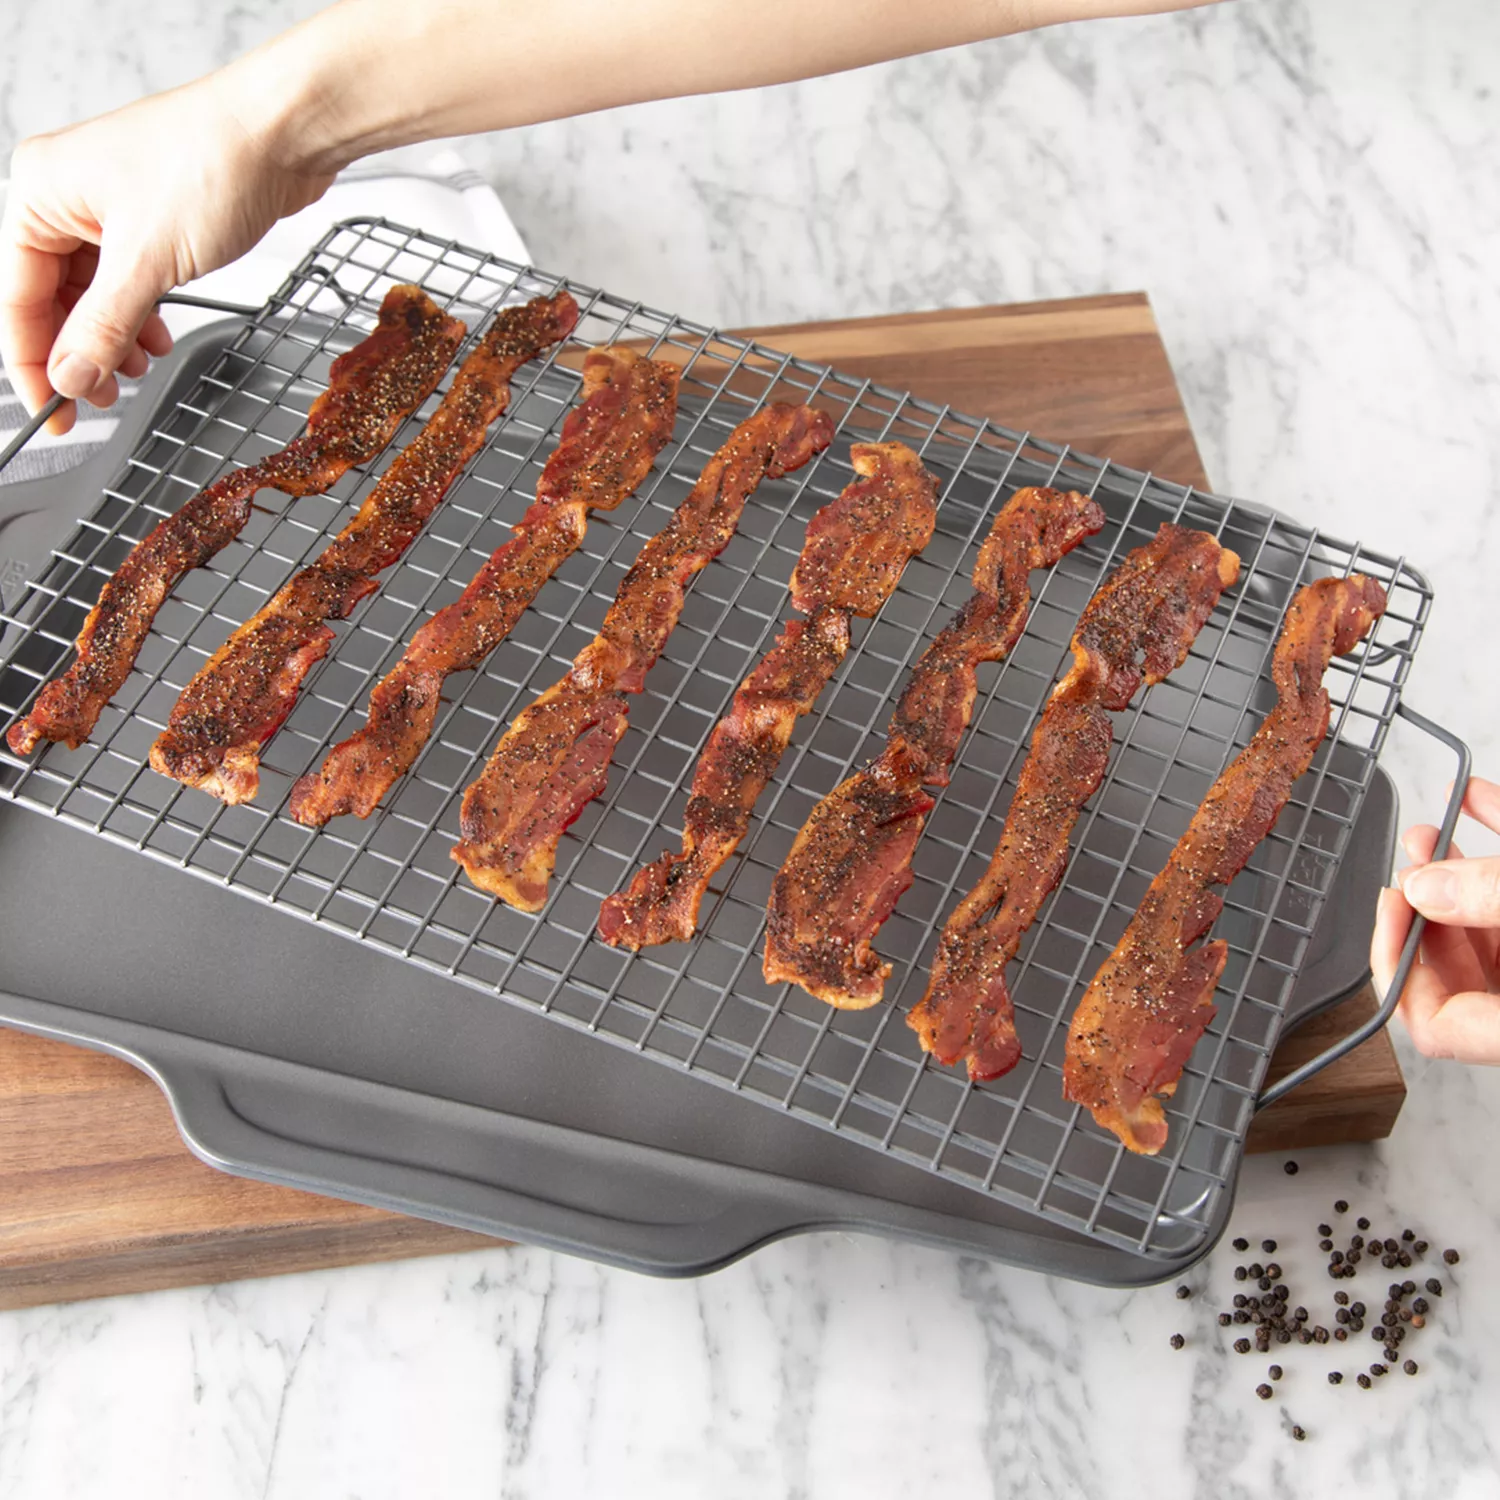 All-Clad Pro-Release Bakeware Half Sheet Pan with Cooling & Baking Rack